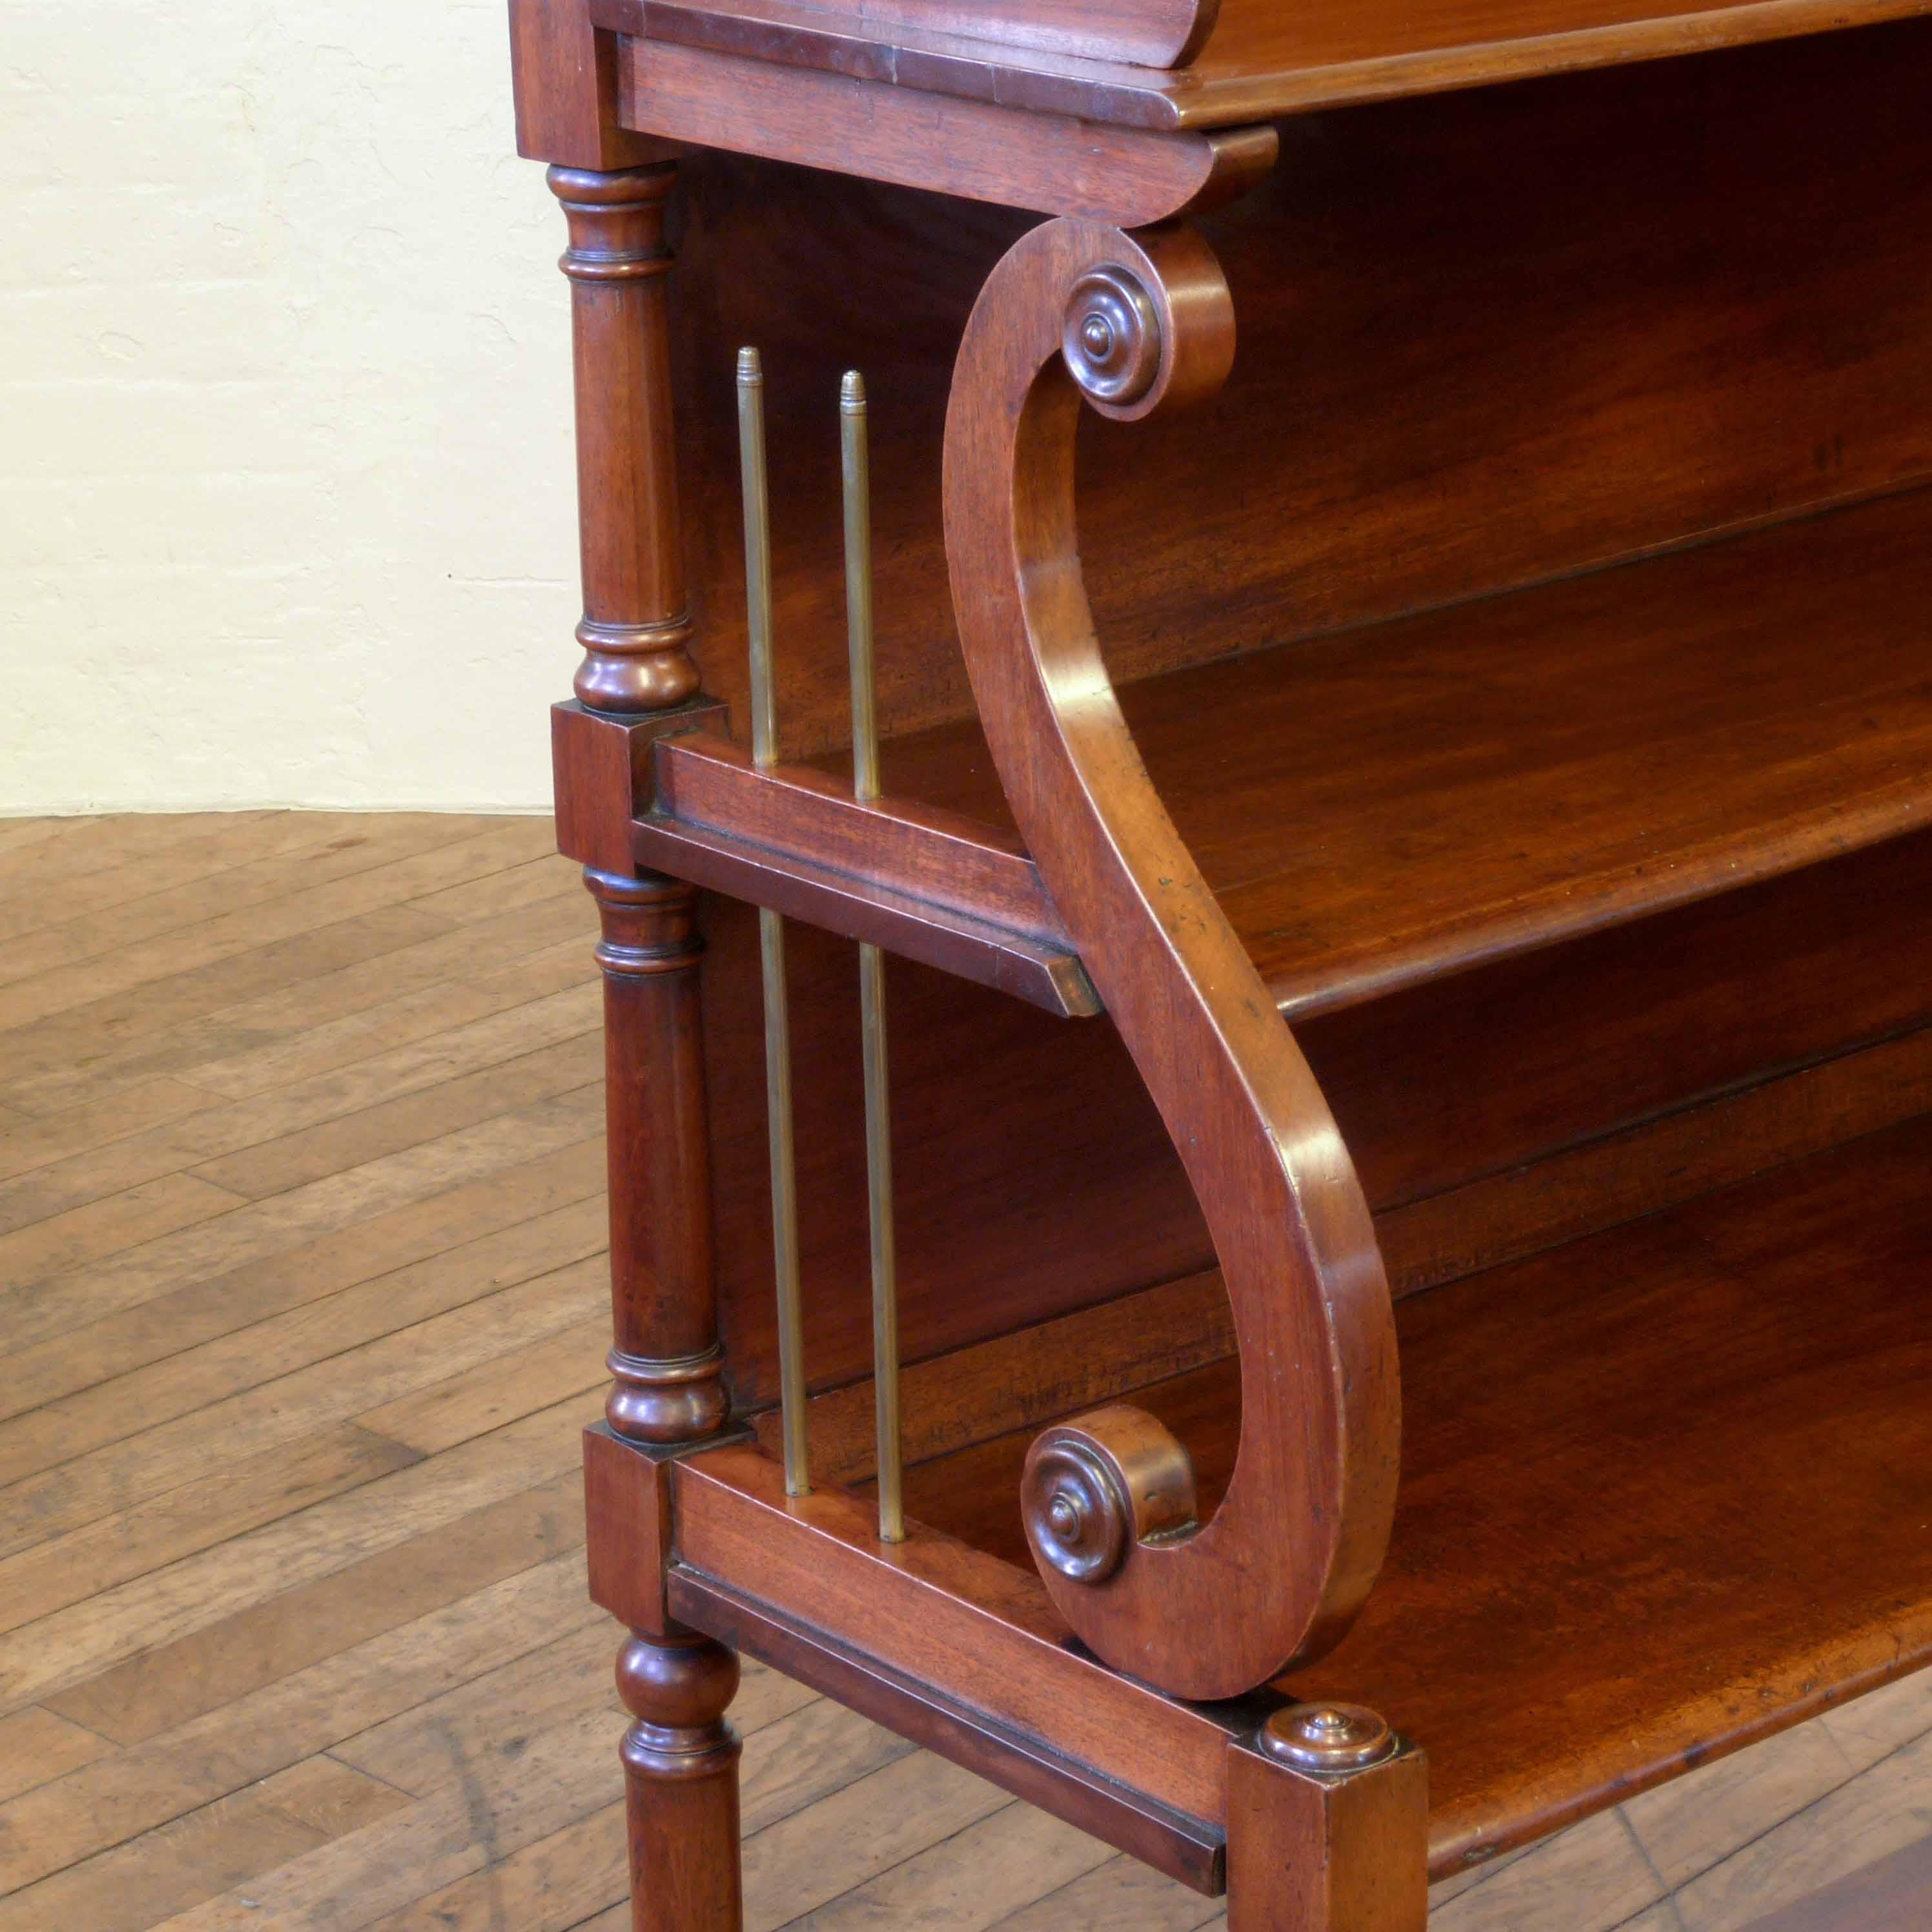 Beautiful Regency mahogany whatnot of large proportions. With turned legs supporting a low undershelf below three stepped shelves with superb lyre ends and inserted brass rods to look like strings. The top has a wonderfully shaped gallery set with